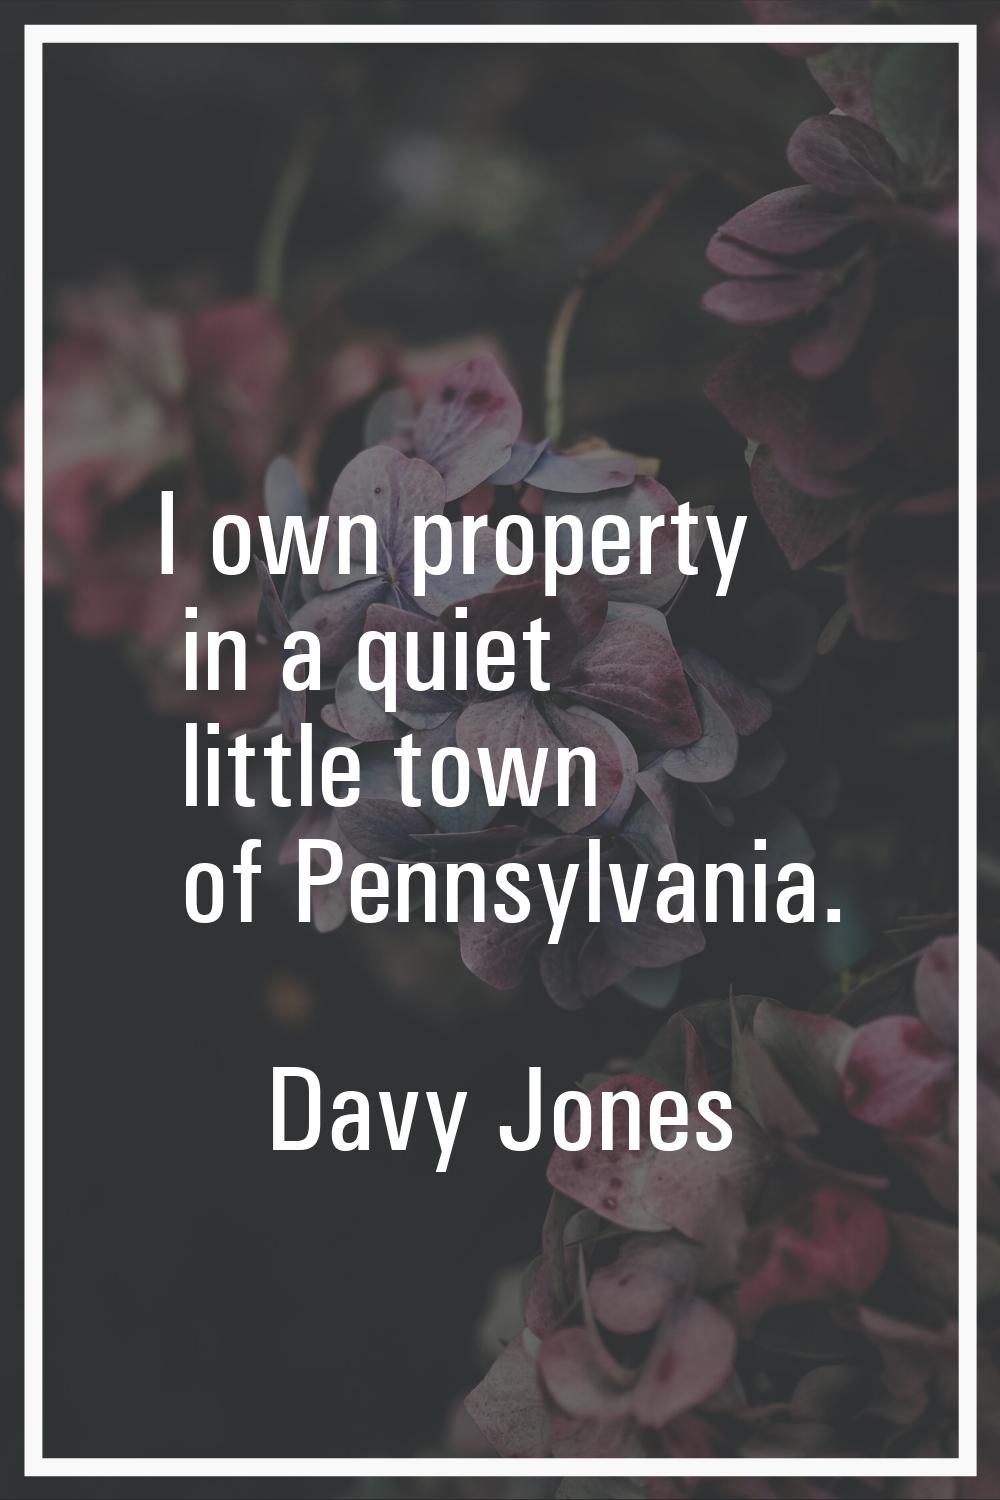 I own property in a quiet little town of Pennsylvania.